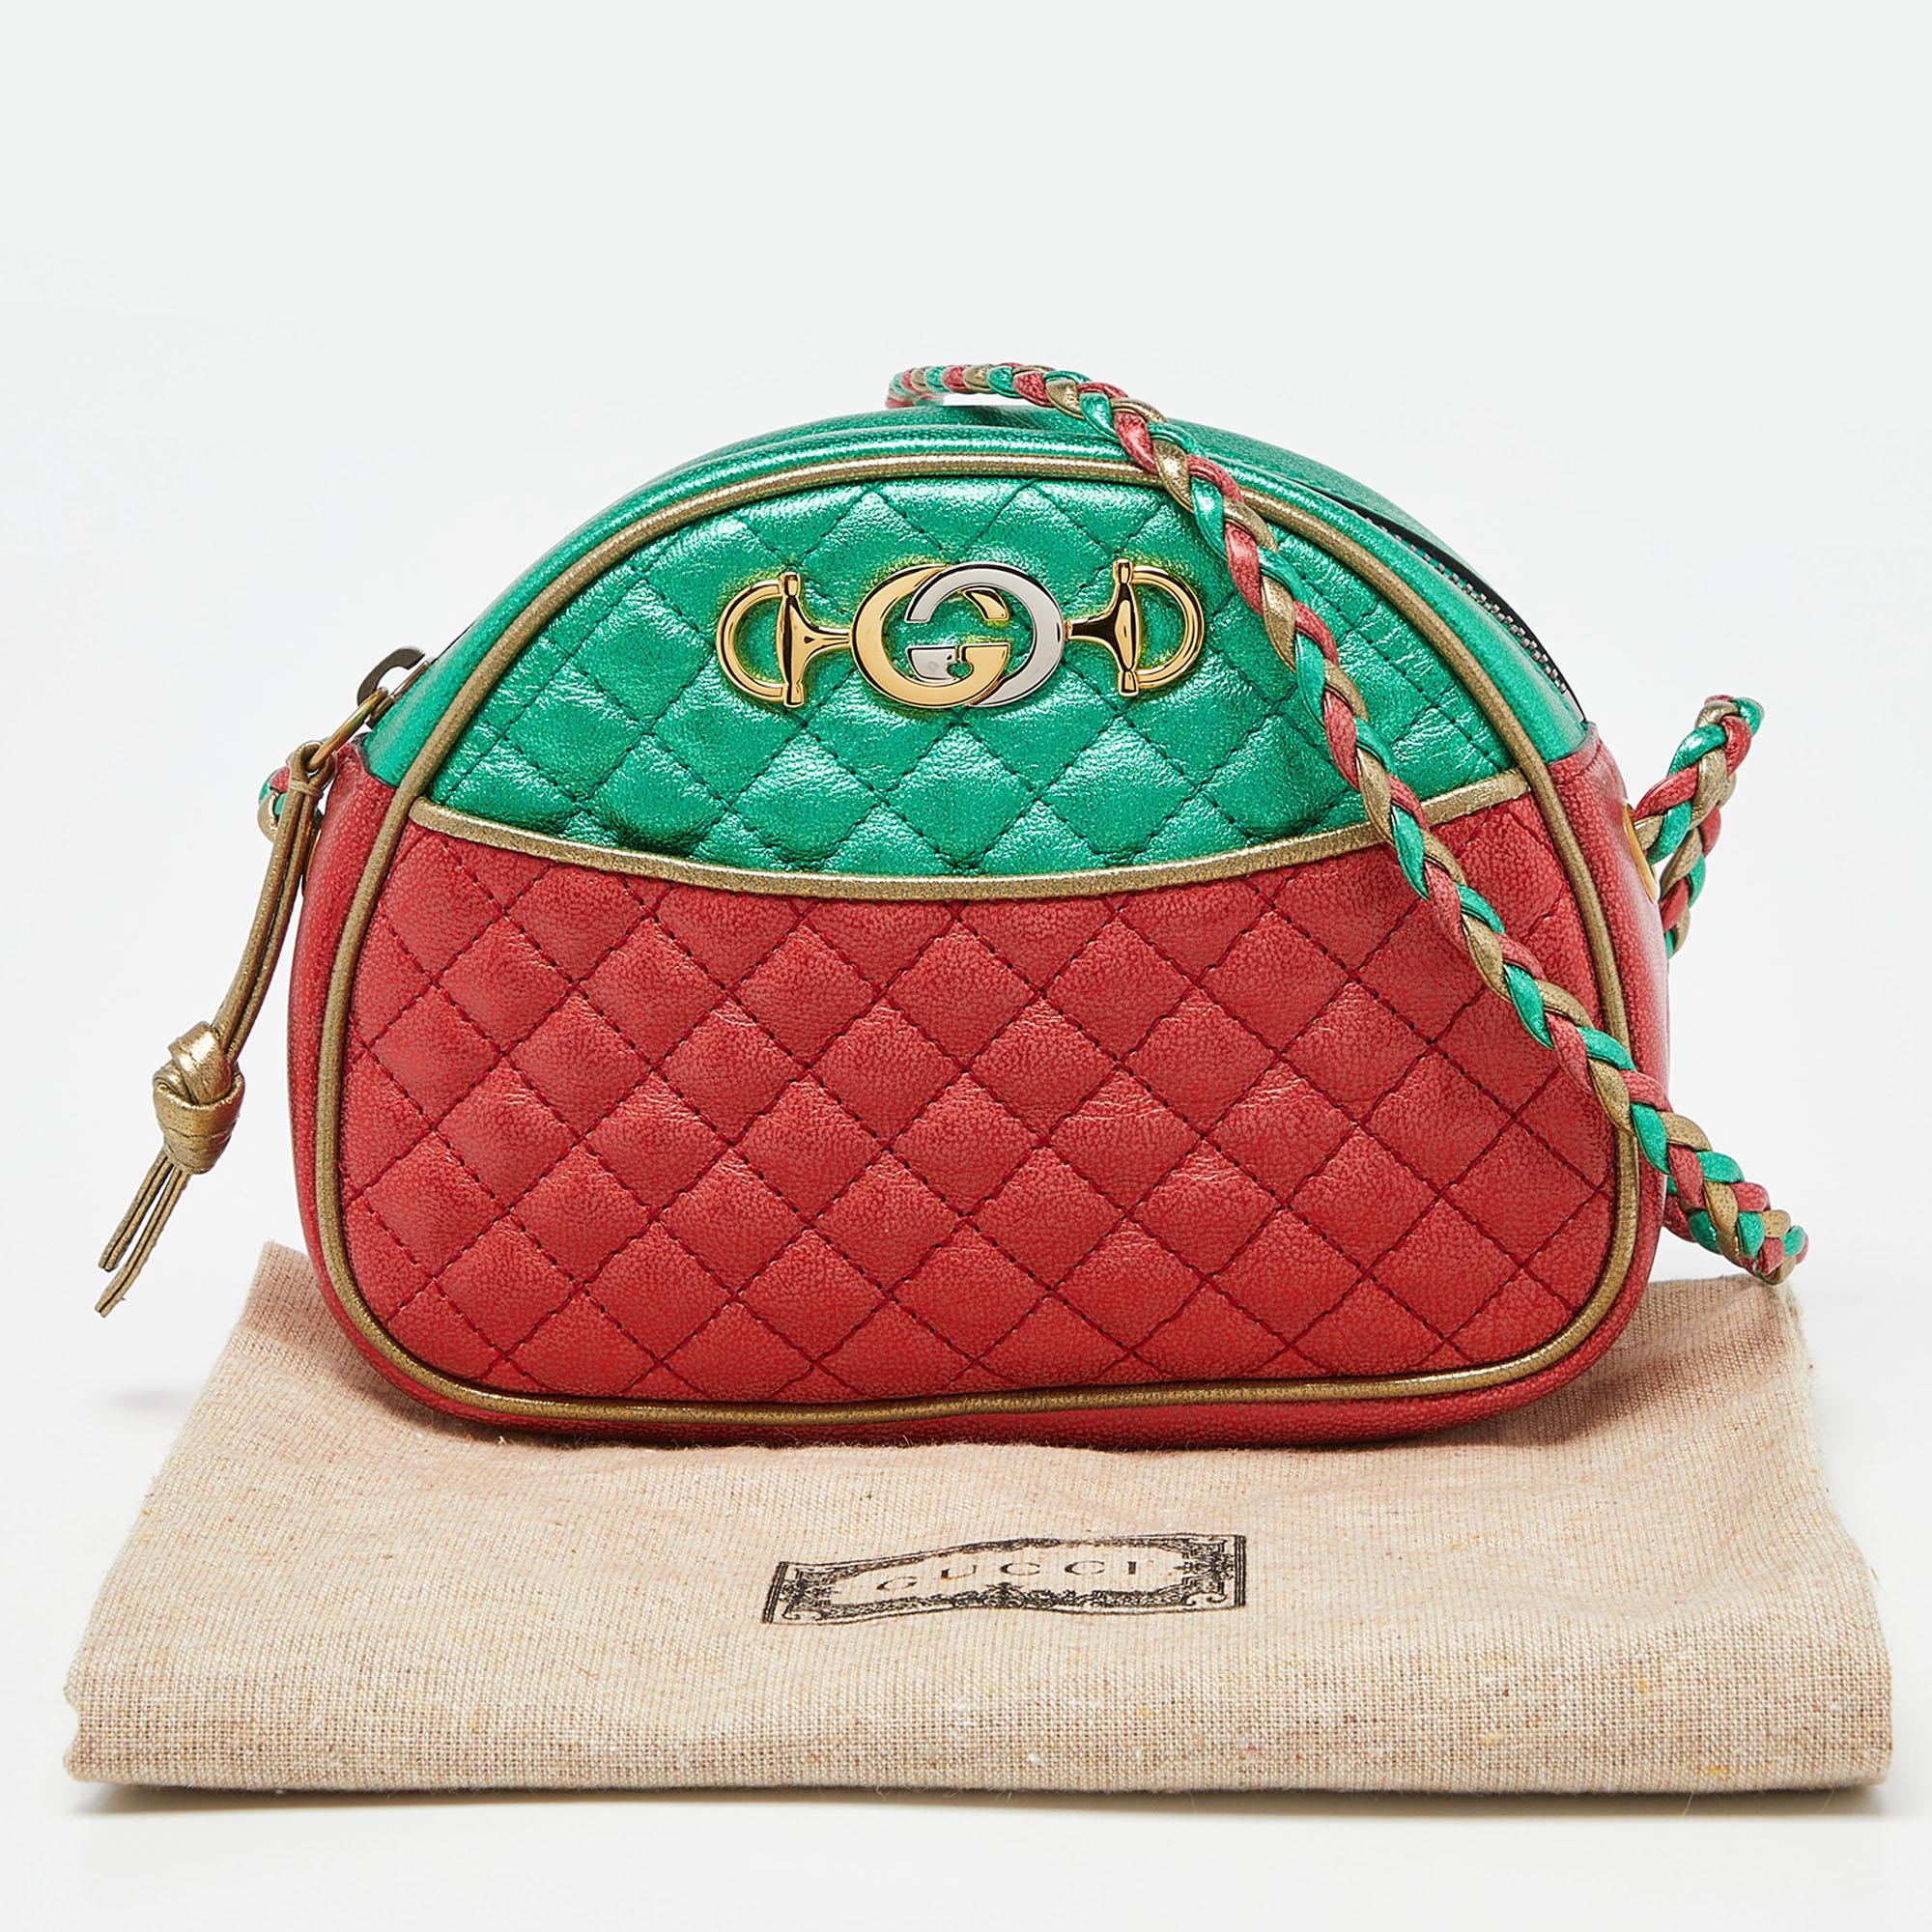 Gucci Multicolor Quilted Leather Mini Trapuntata Crossbody Bag For Sale 8